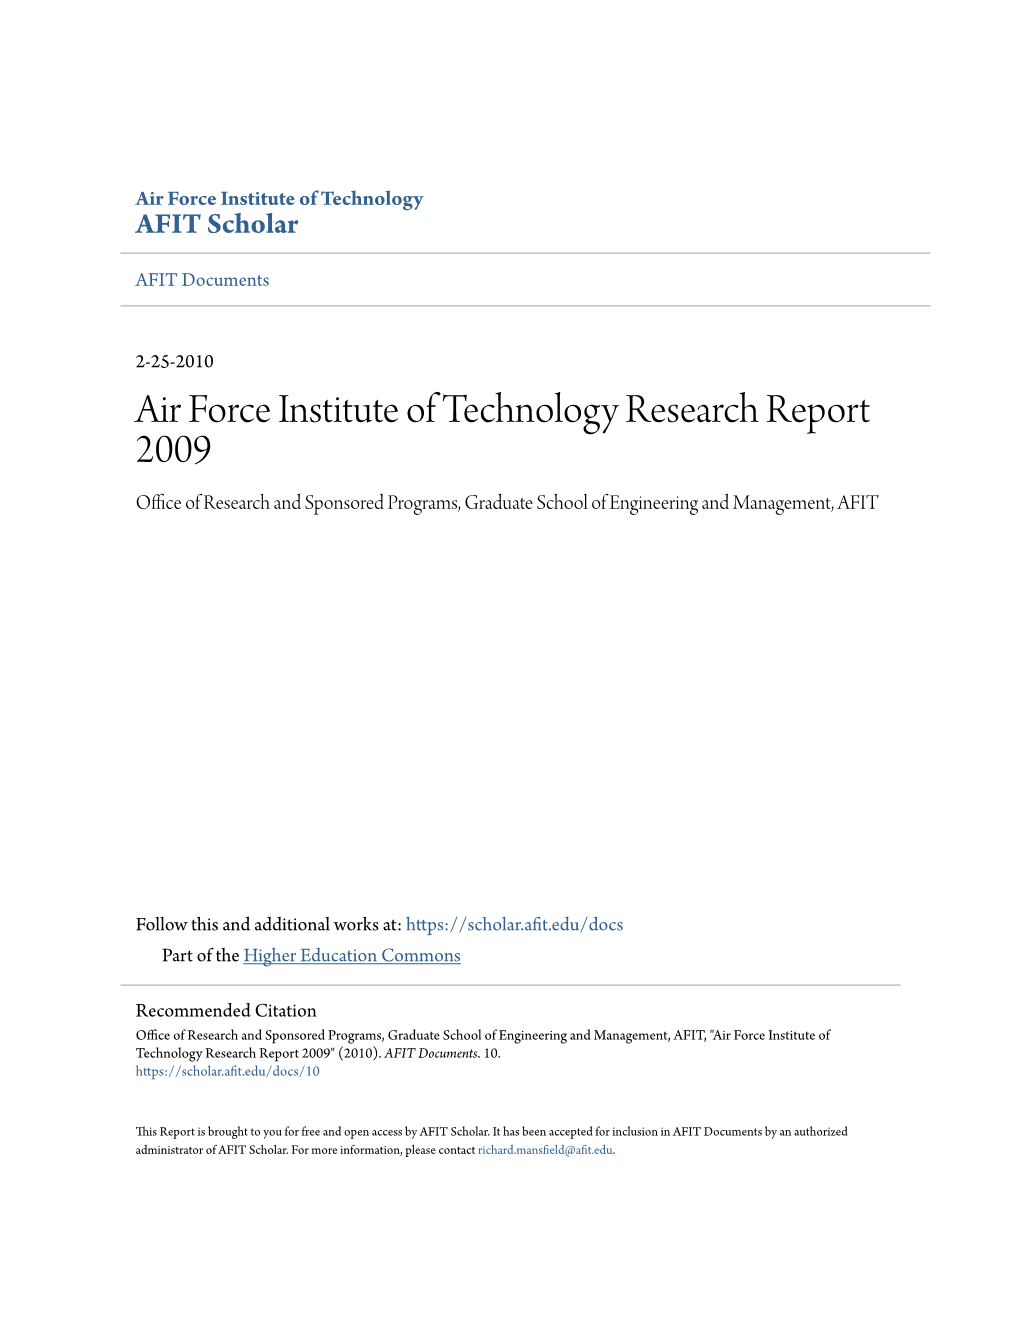 Air Force Institute of Technology Research Report 2009 Office of Research and Sponsored Programs, Graduate School of Engineering and Management, AFIT